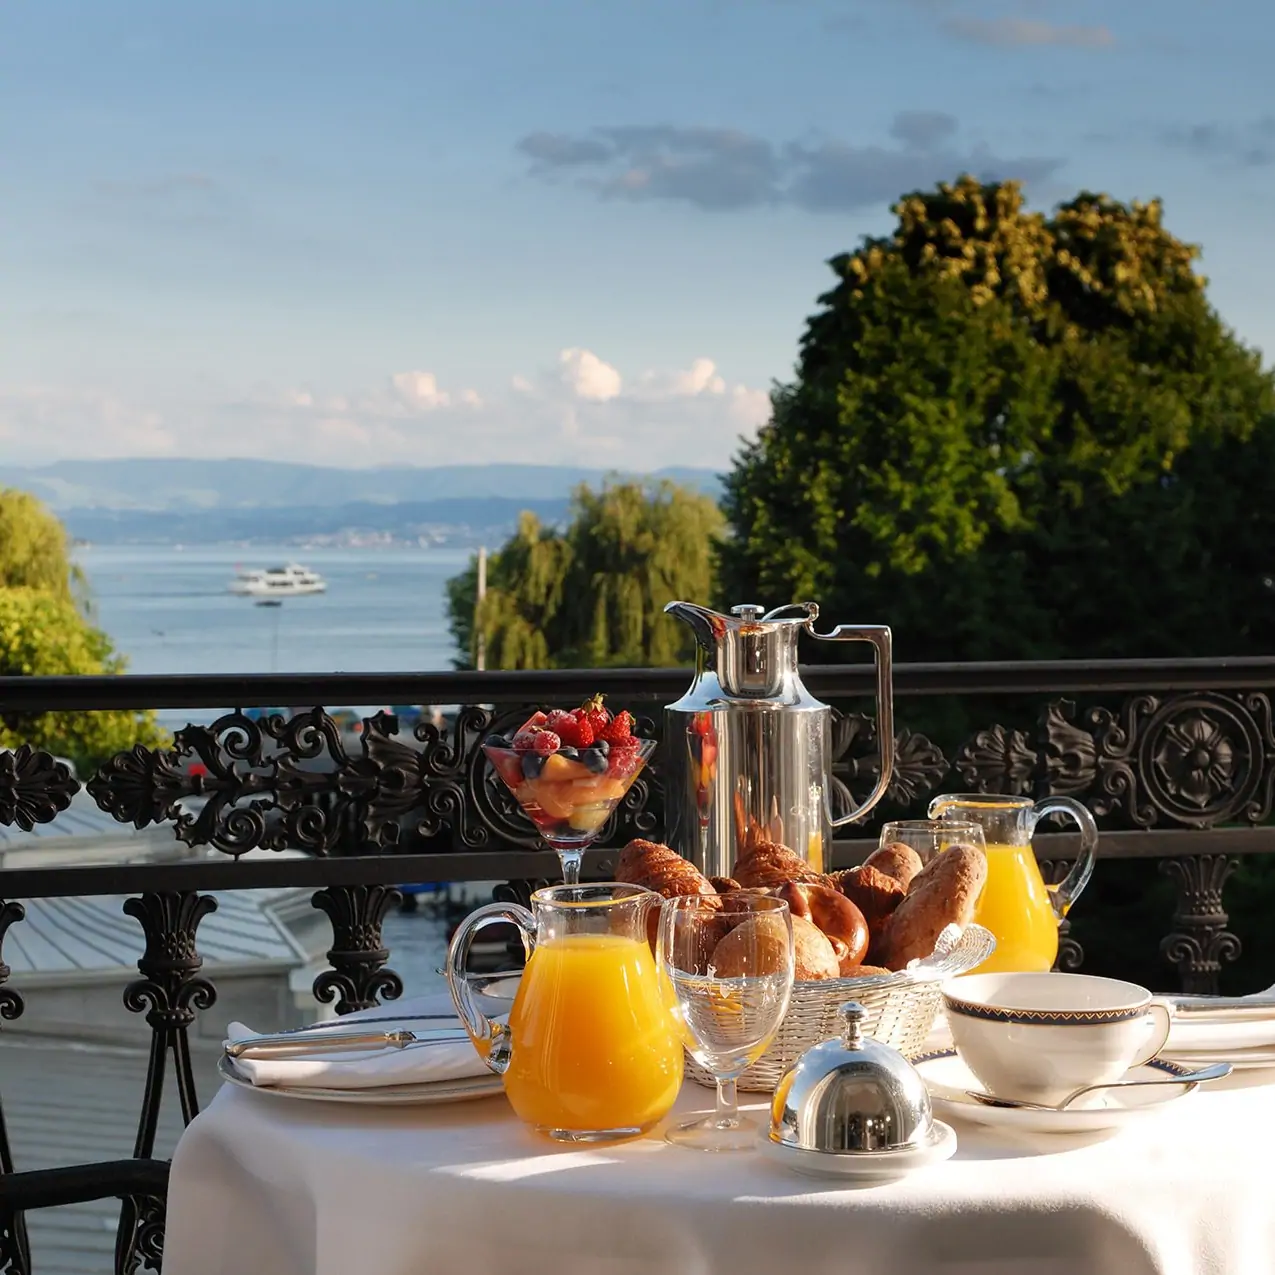 Baur au Lac Breakfast on The Terrace of Suite, View of Lake Zurich